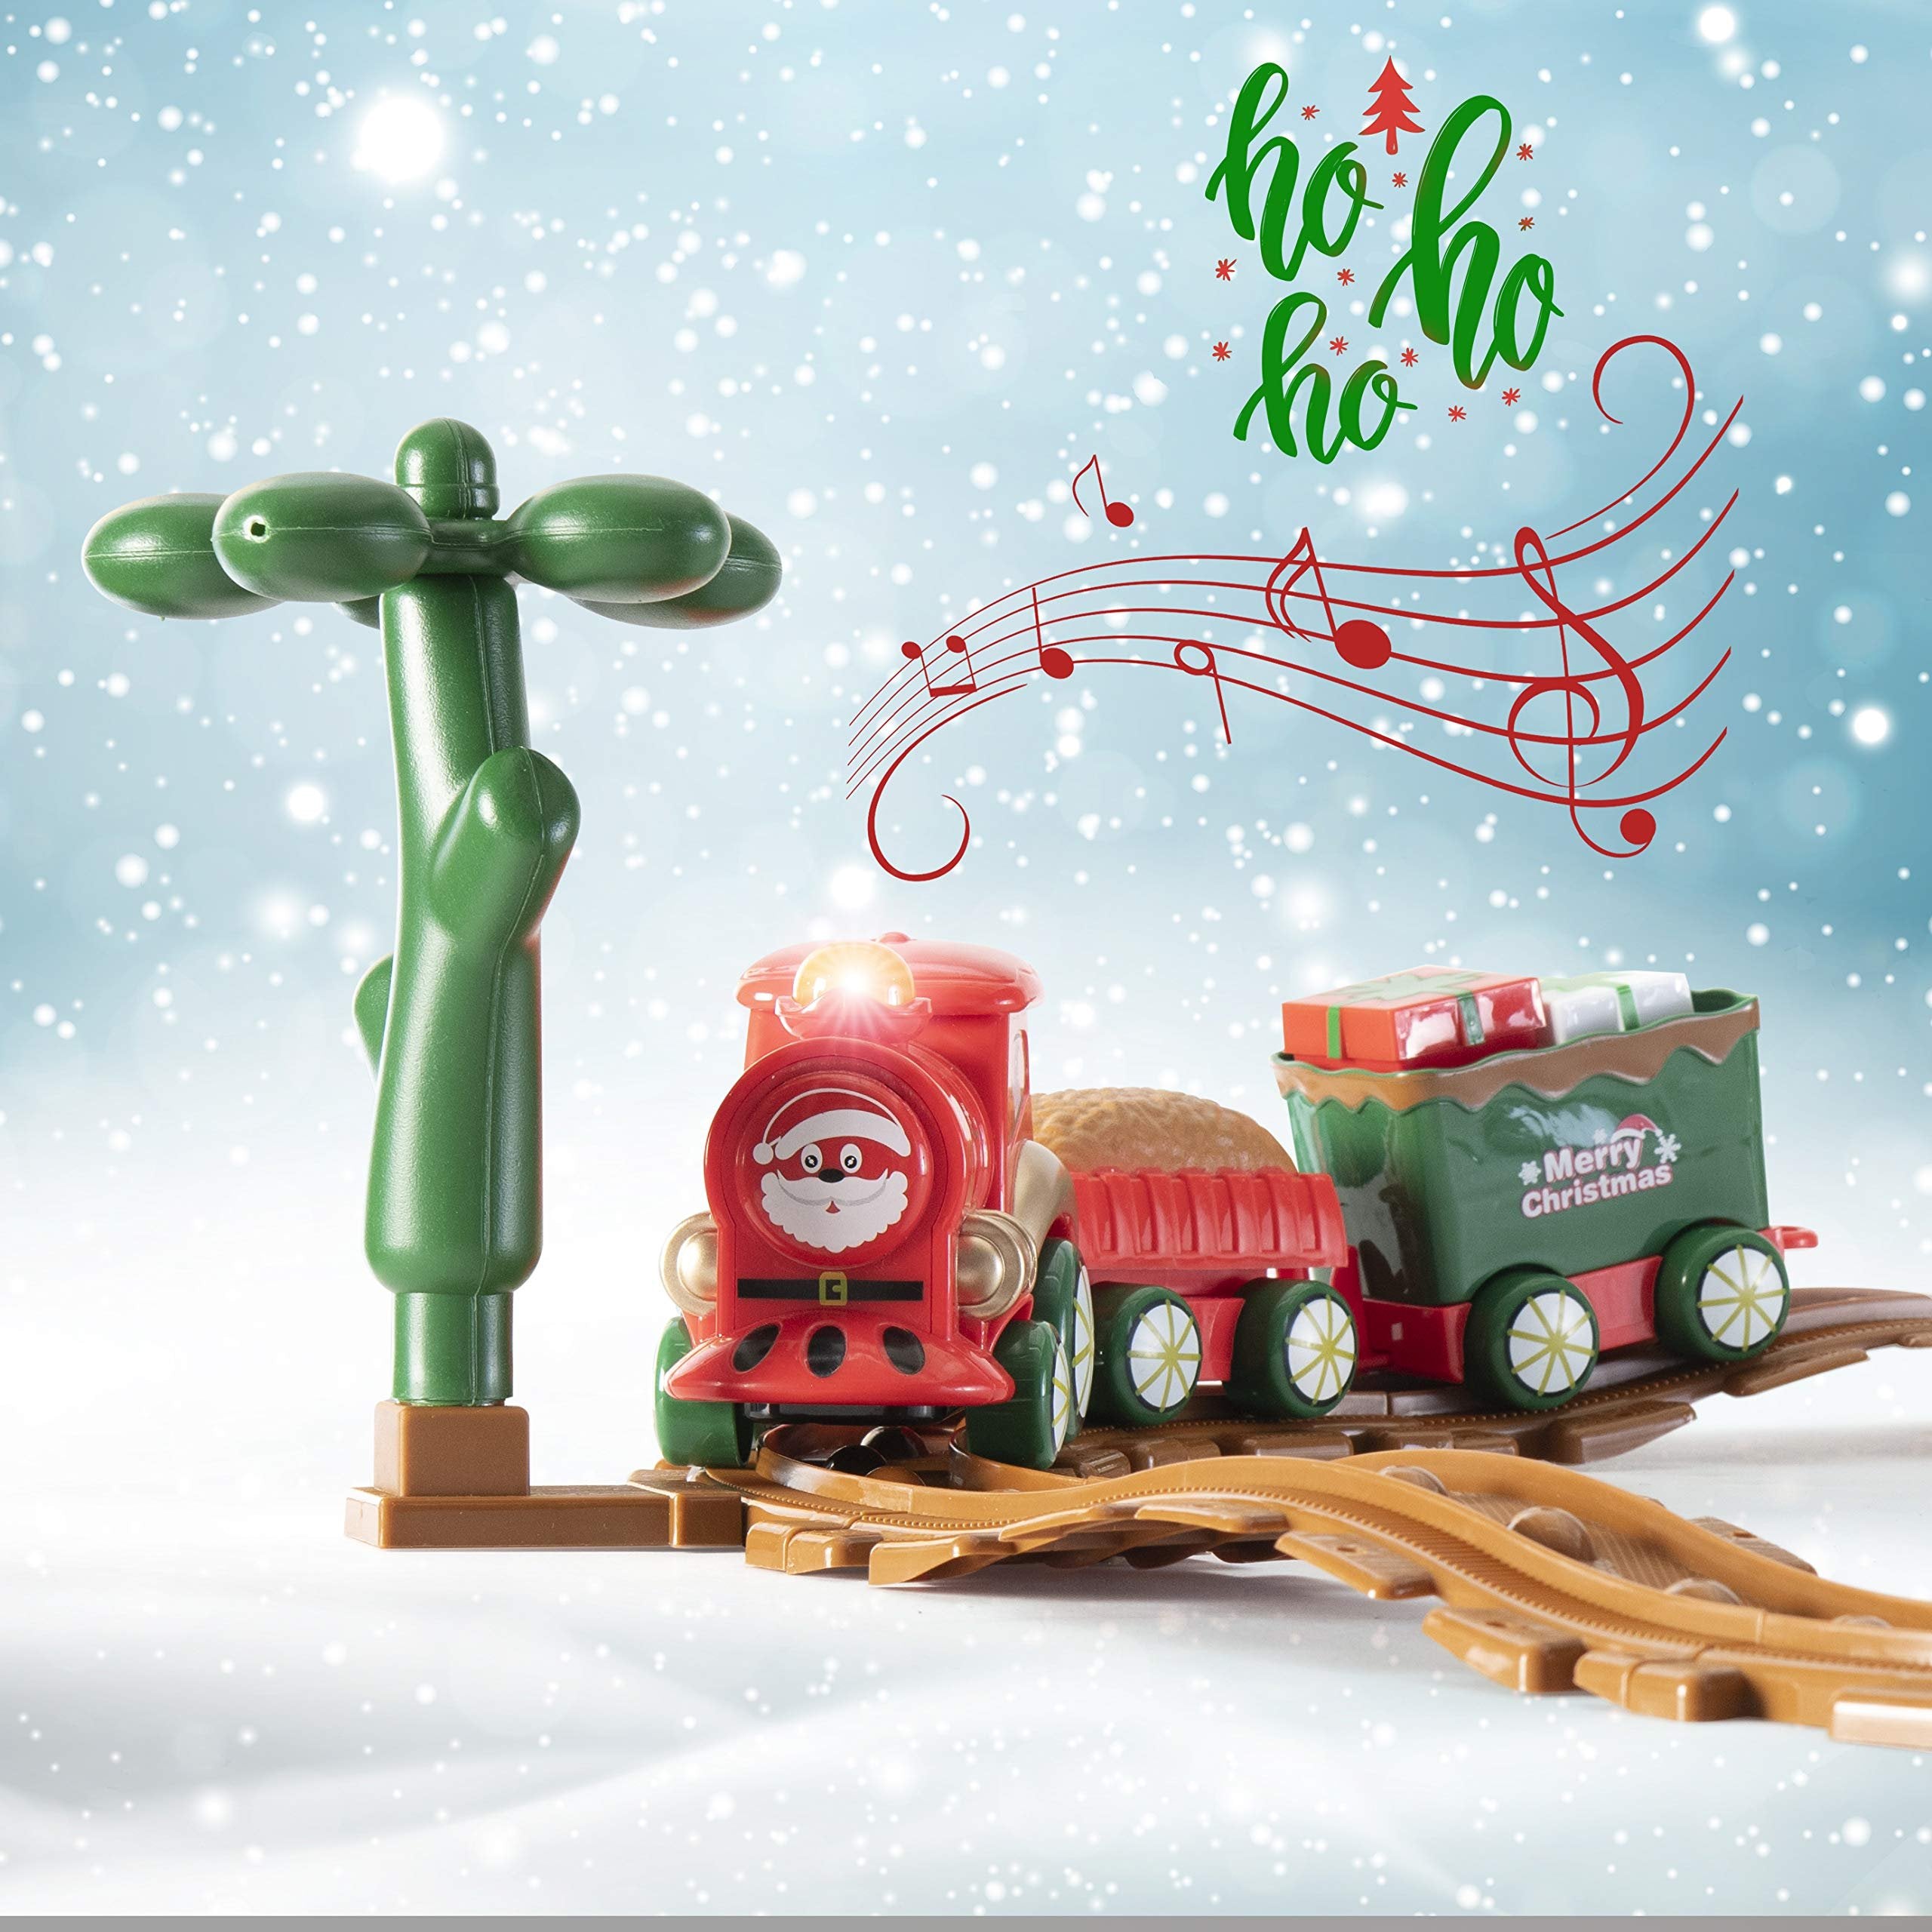 PREXTEX Kids Musical Train Set for Kids with Christmas-Themed Music, Perfect Year-Round Gift for Boys Girls Toddlers